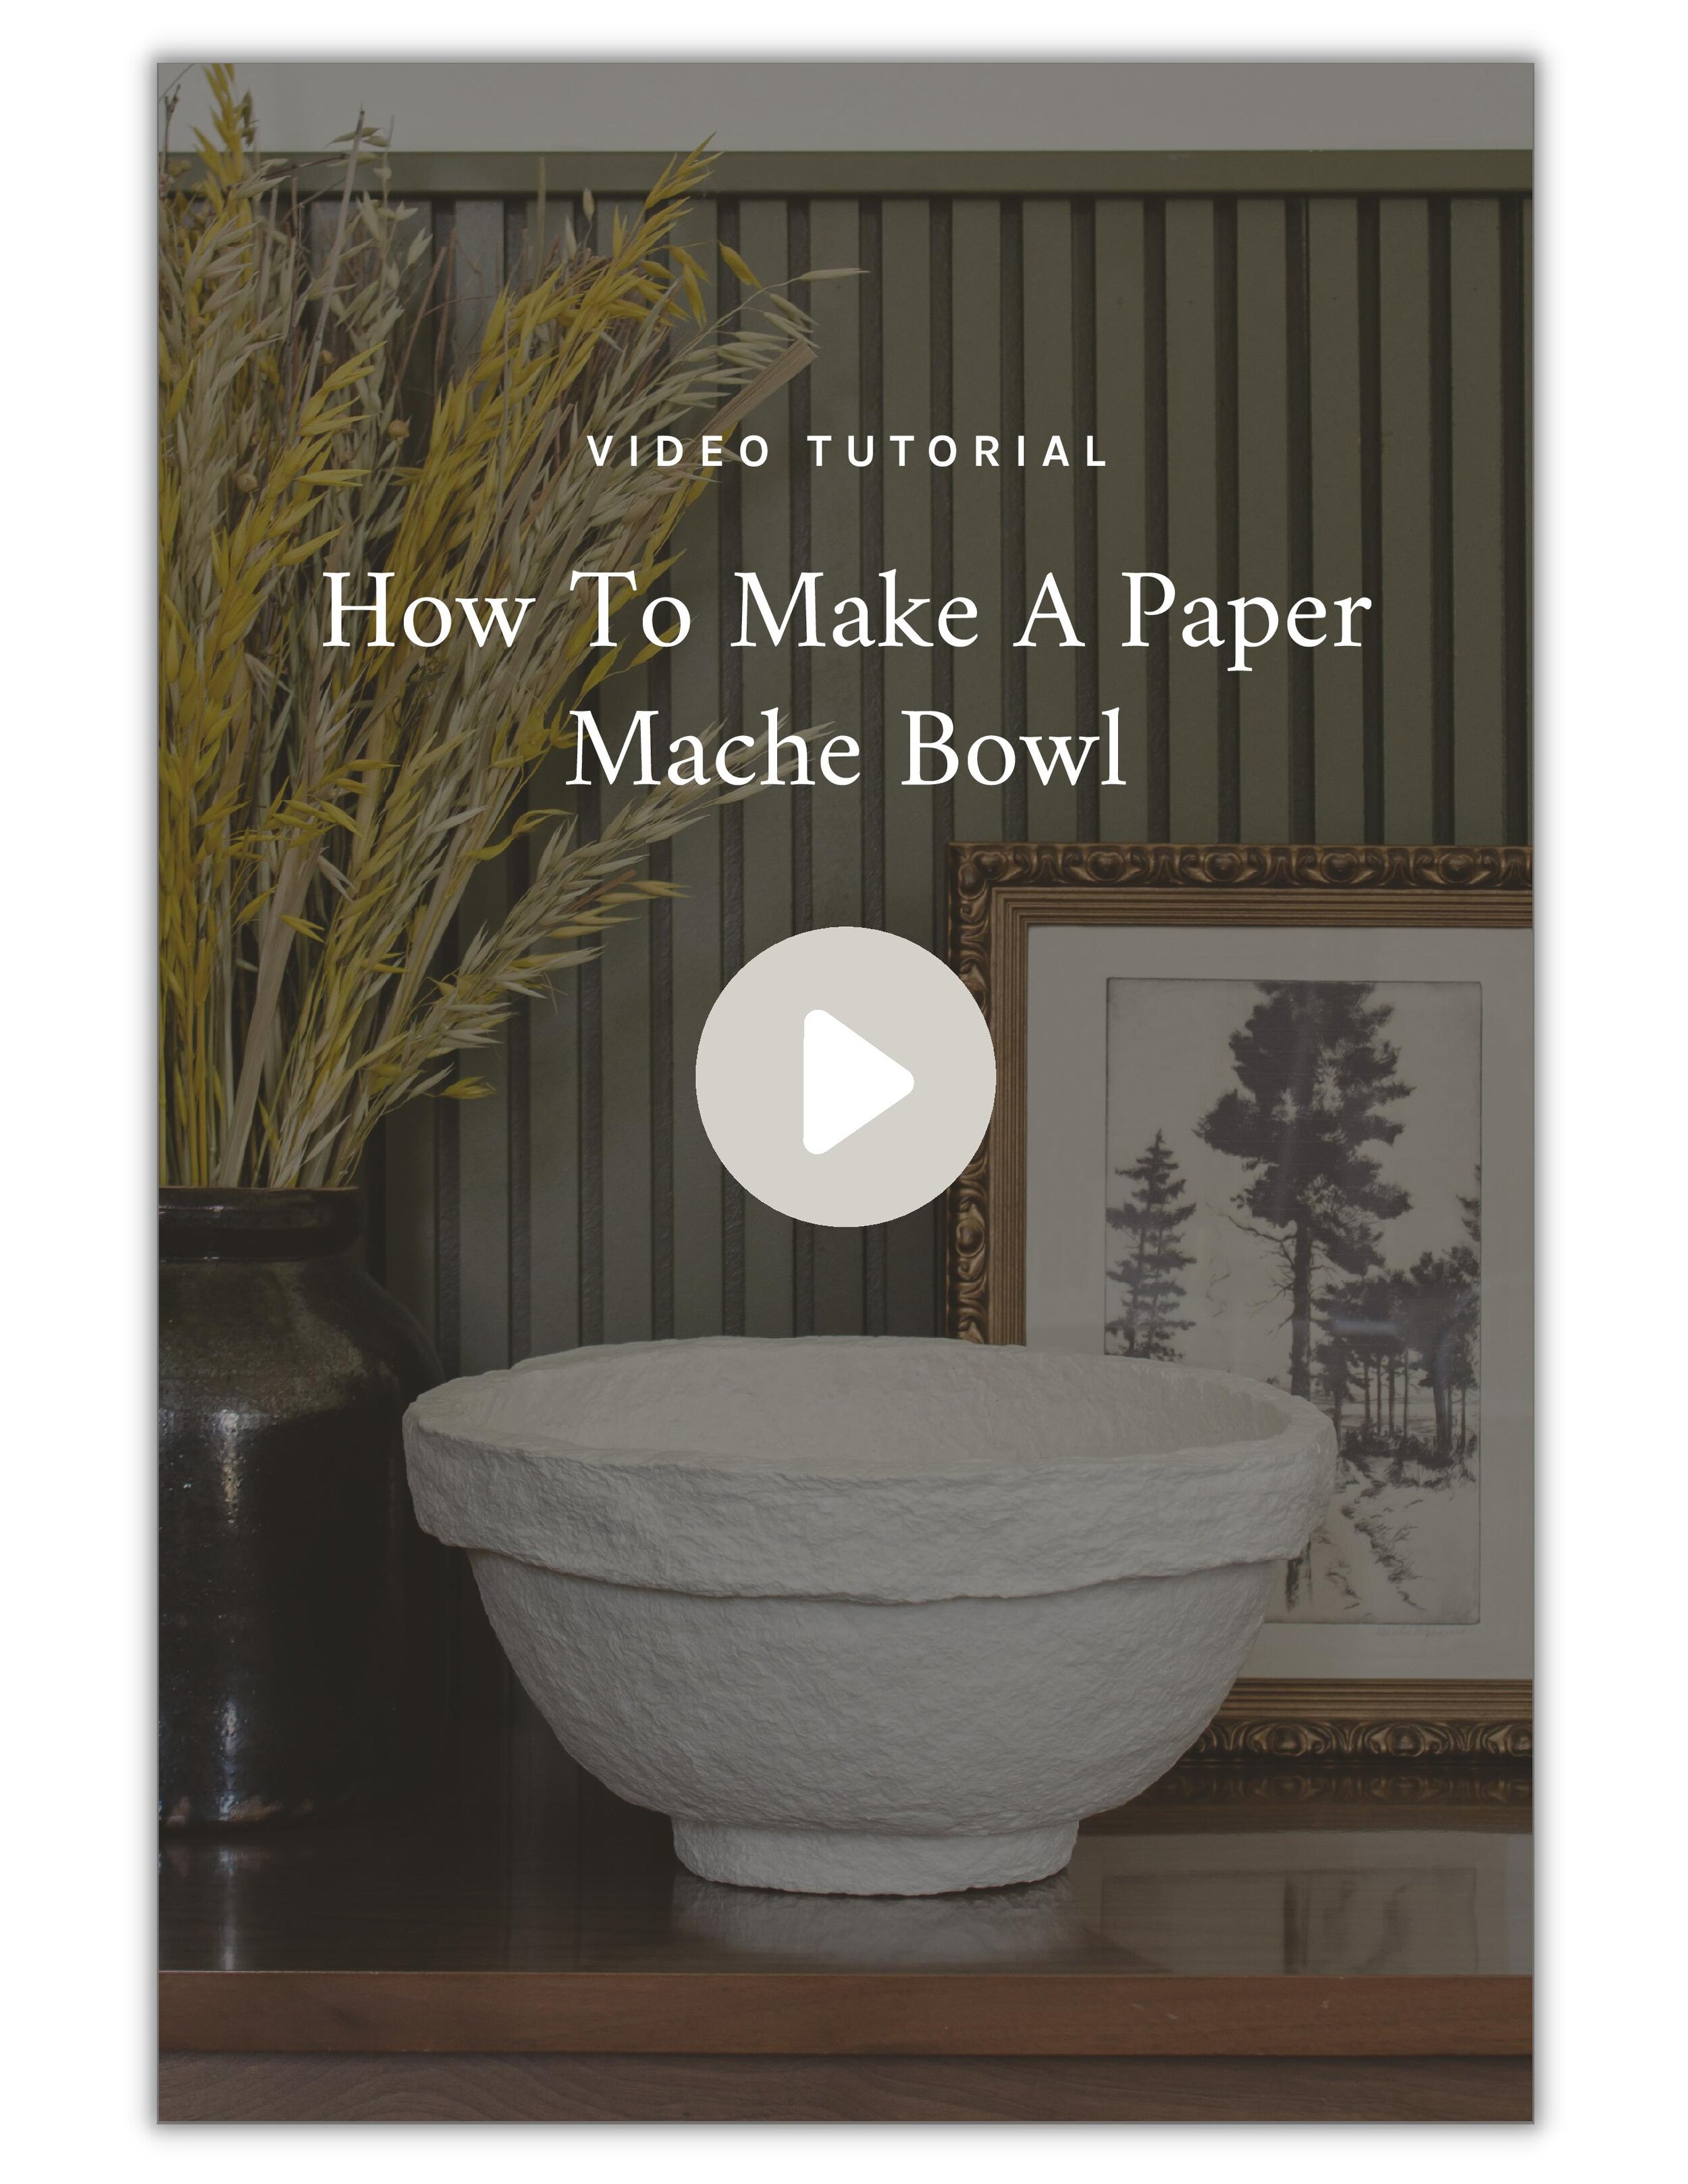 How to Make a Paper Mache Bowl - 2 Easiest Methods